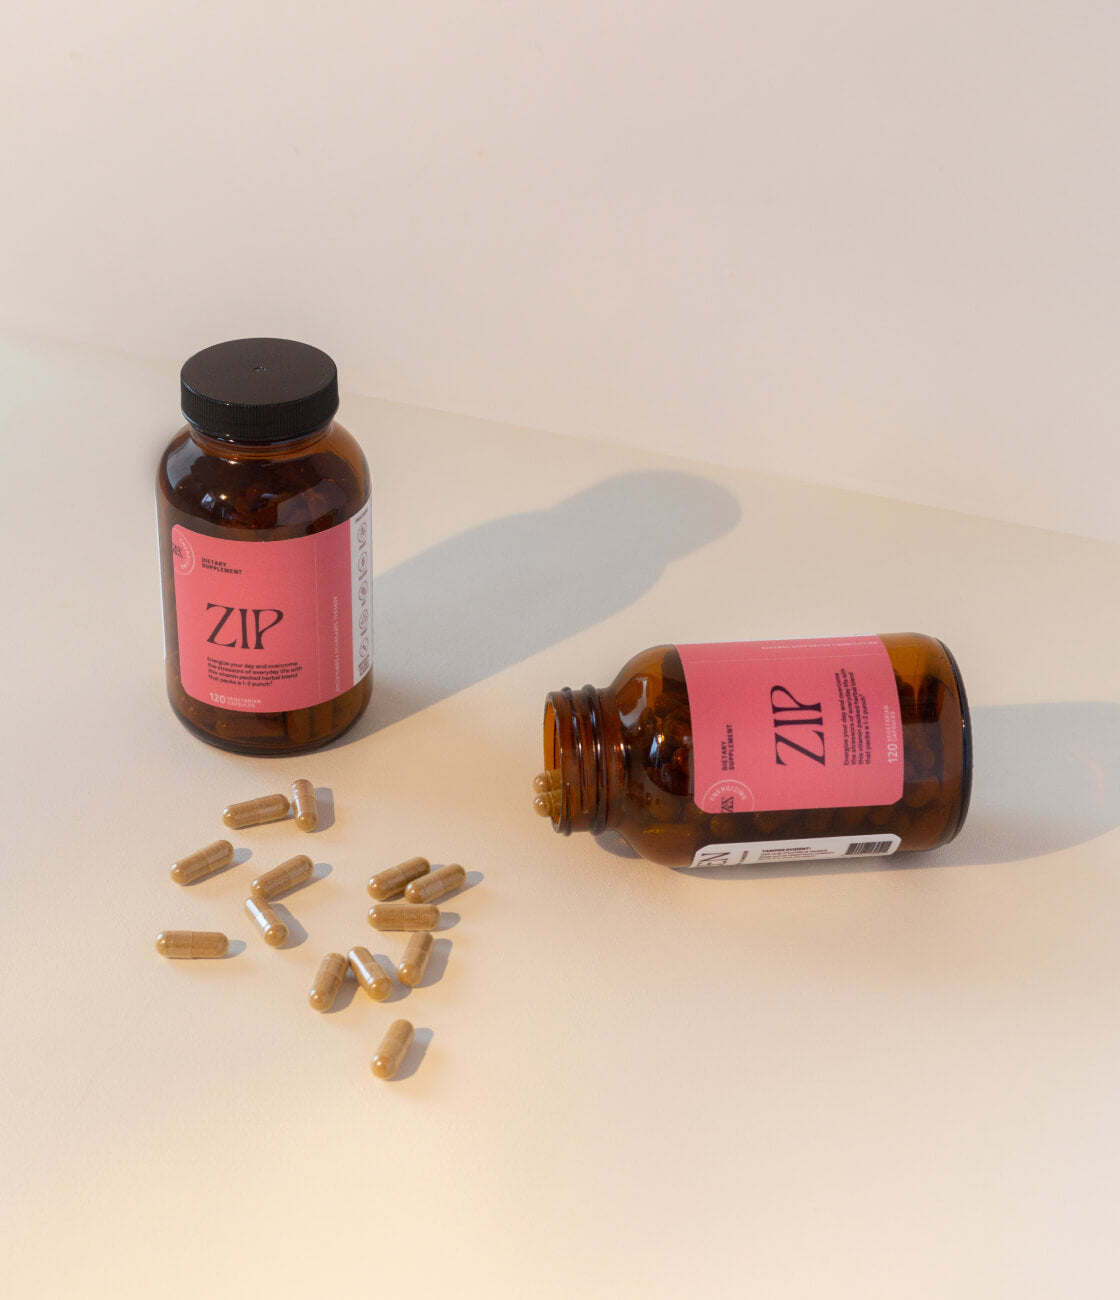 Zip comes with 120 capsules, enough to take 2 capsules a day for 1–2 months when used as directed.  [AD: 2 bottles of zip on a plain cream backdrop and shown. 1 bottle is open with a few pills scattered on the tabletop]